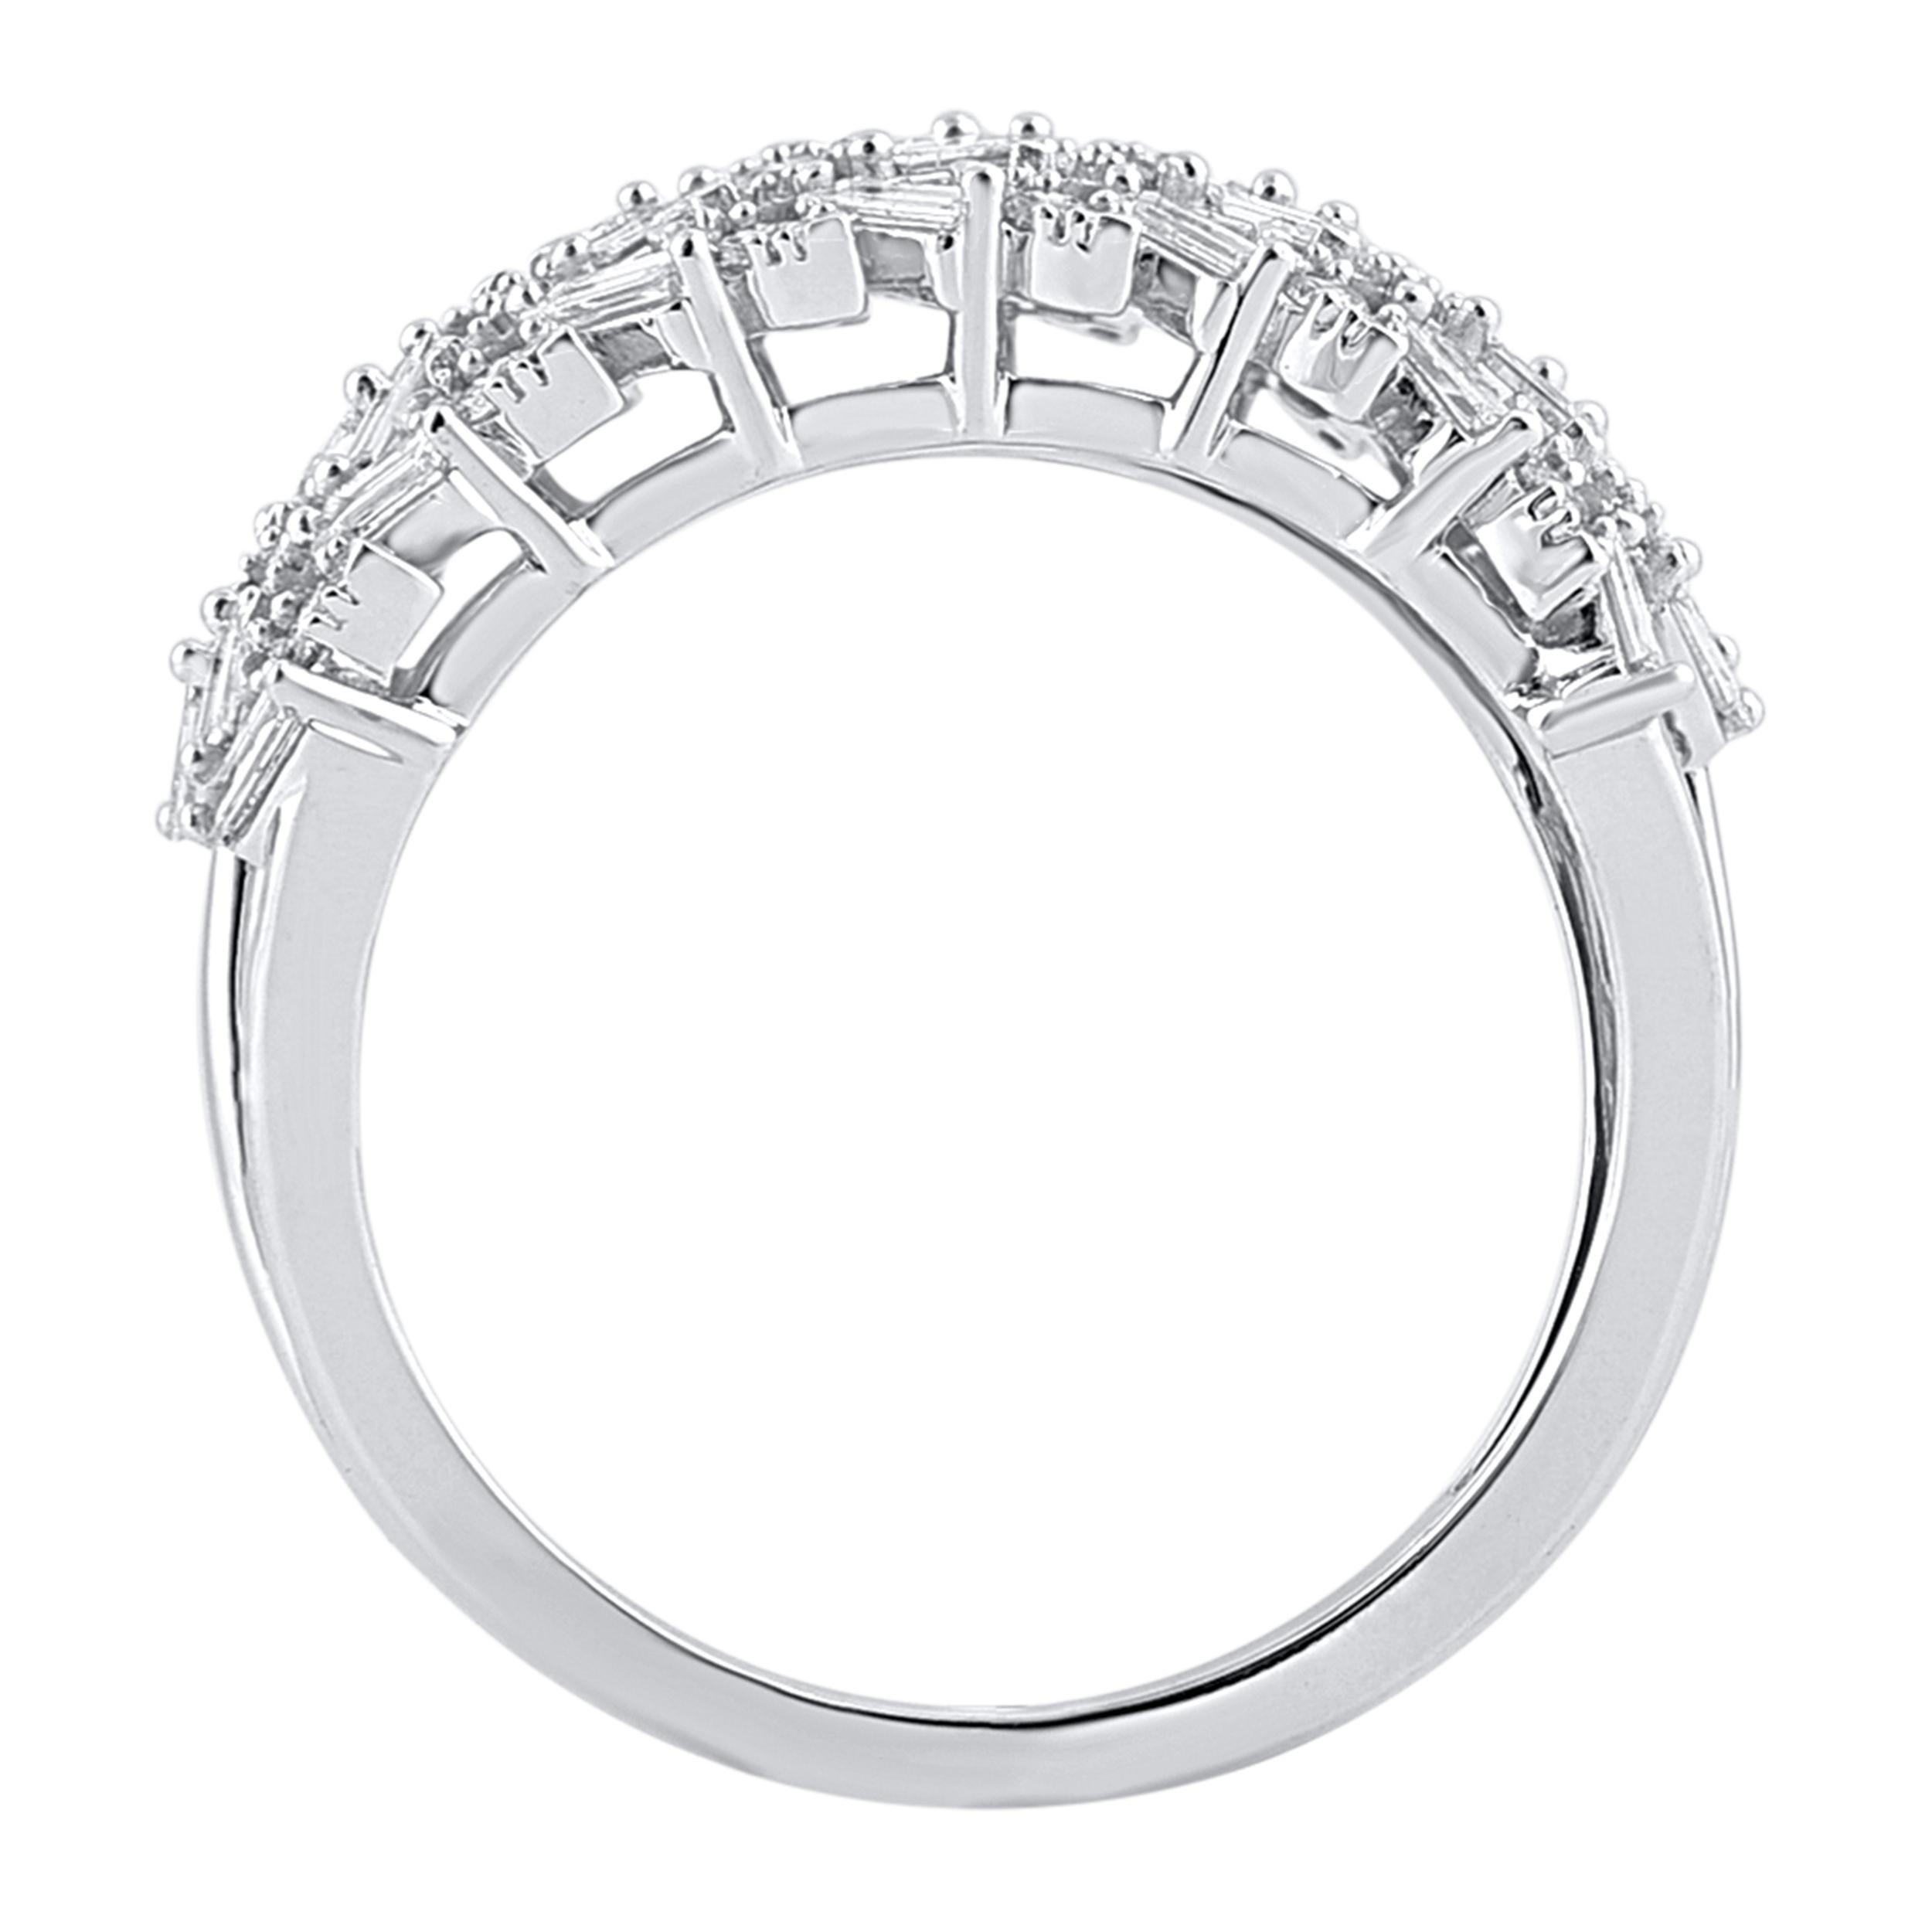 Truly exquisite, this diamond wedding band is sure to be admired for the inherent classic beauty and elegance within its design. This ring is beautifully crafted in 14 Karat white gold and embedded with 100 round brilliant, single cut & Baguette